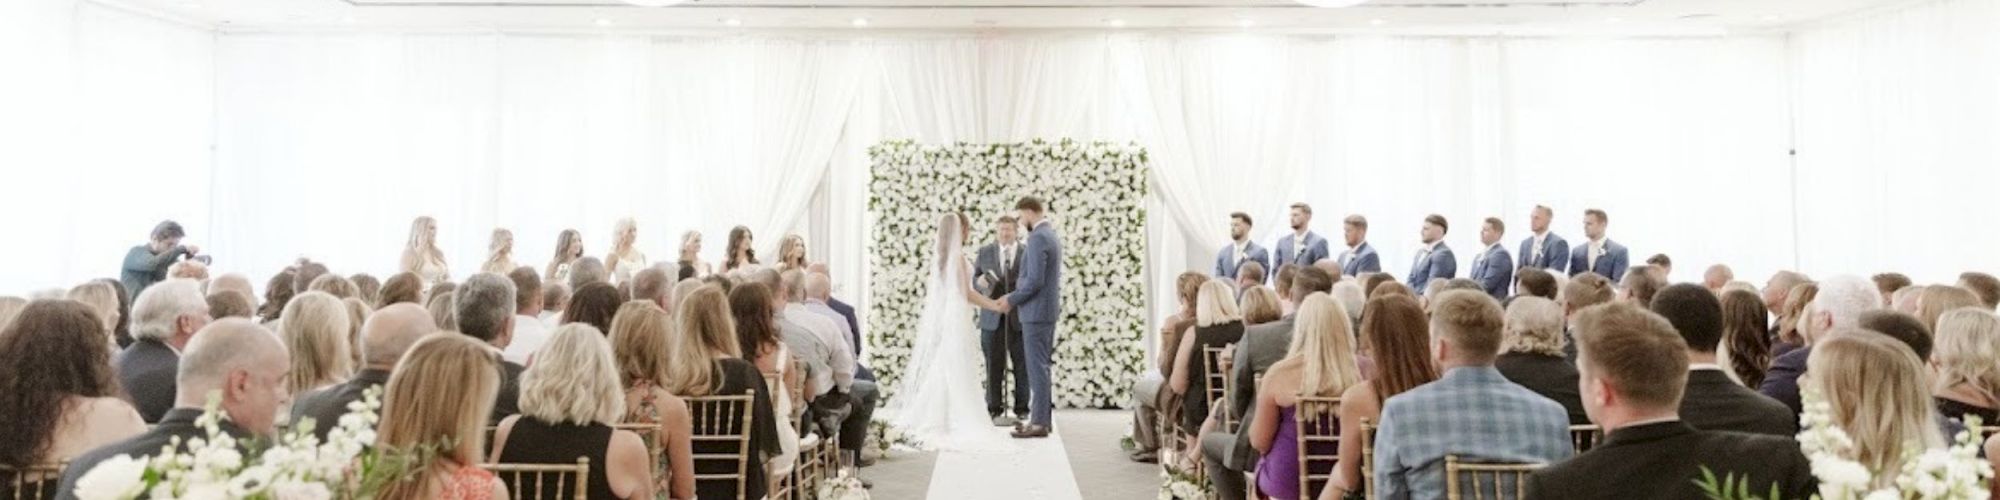 A wedding ceremony with the couple at the altar, bridesmaids and groomsmen beside them, and guests seated in rows watching.